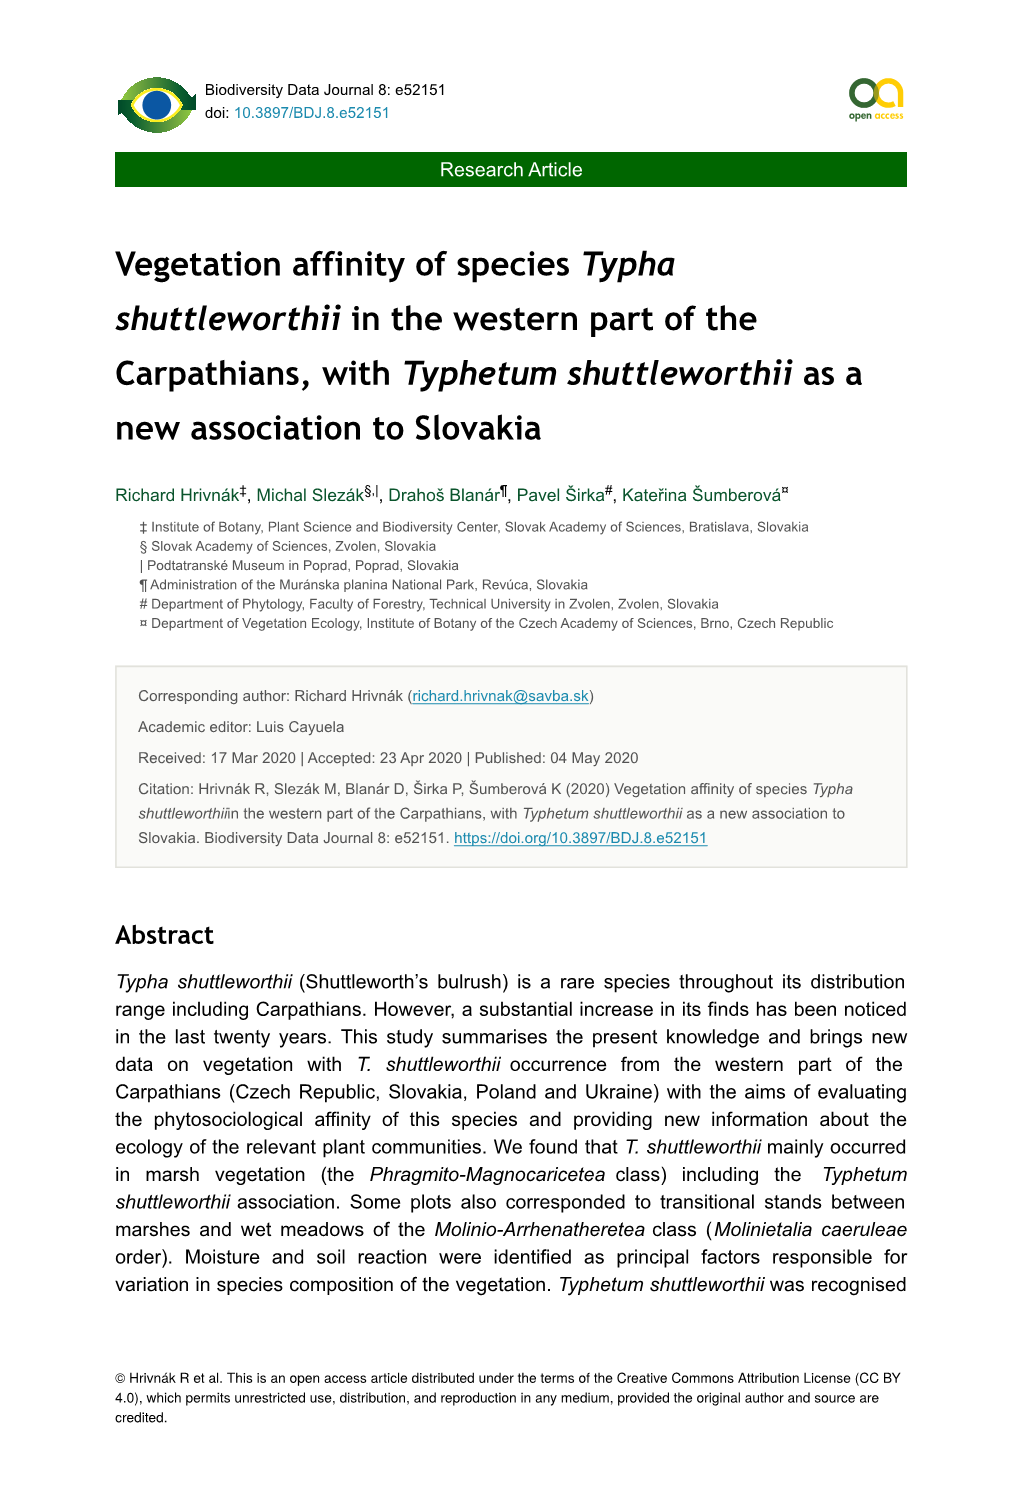 Vegetation Affinity of Species Typha Shuttleworthii in the Western Part of the Carpathians, with Typhetum Shuttleworthii As a New Association to Slovakia